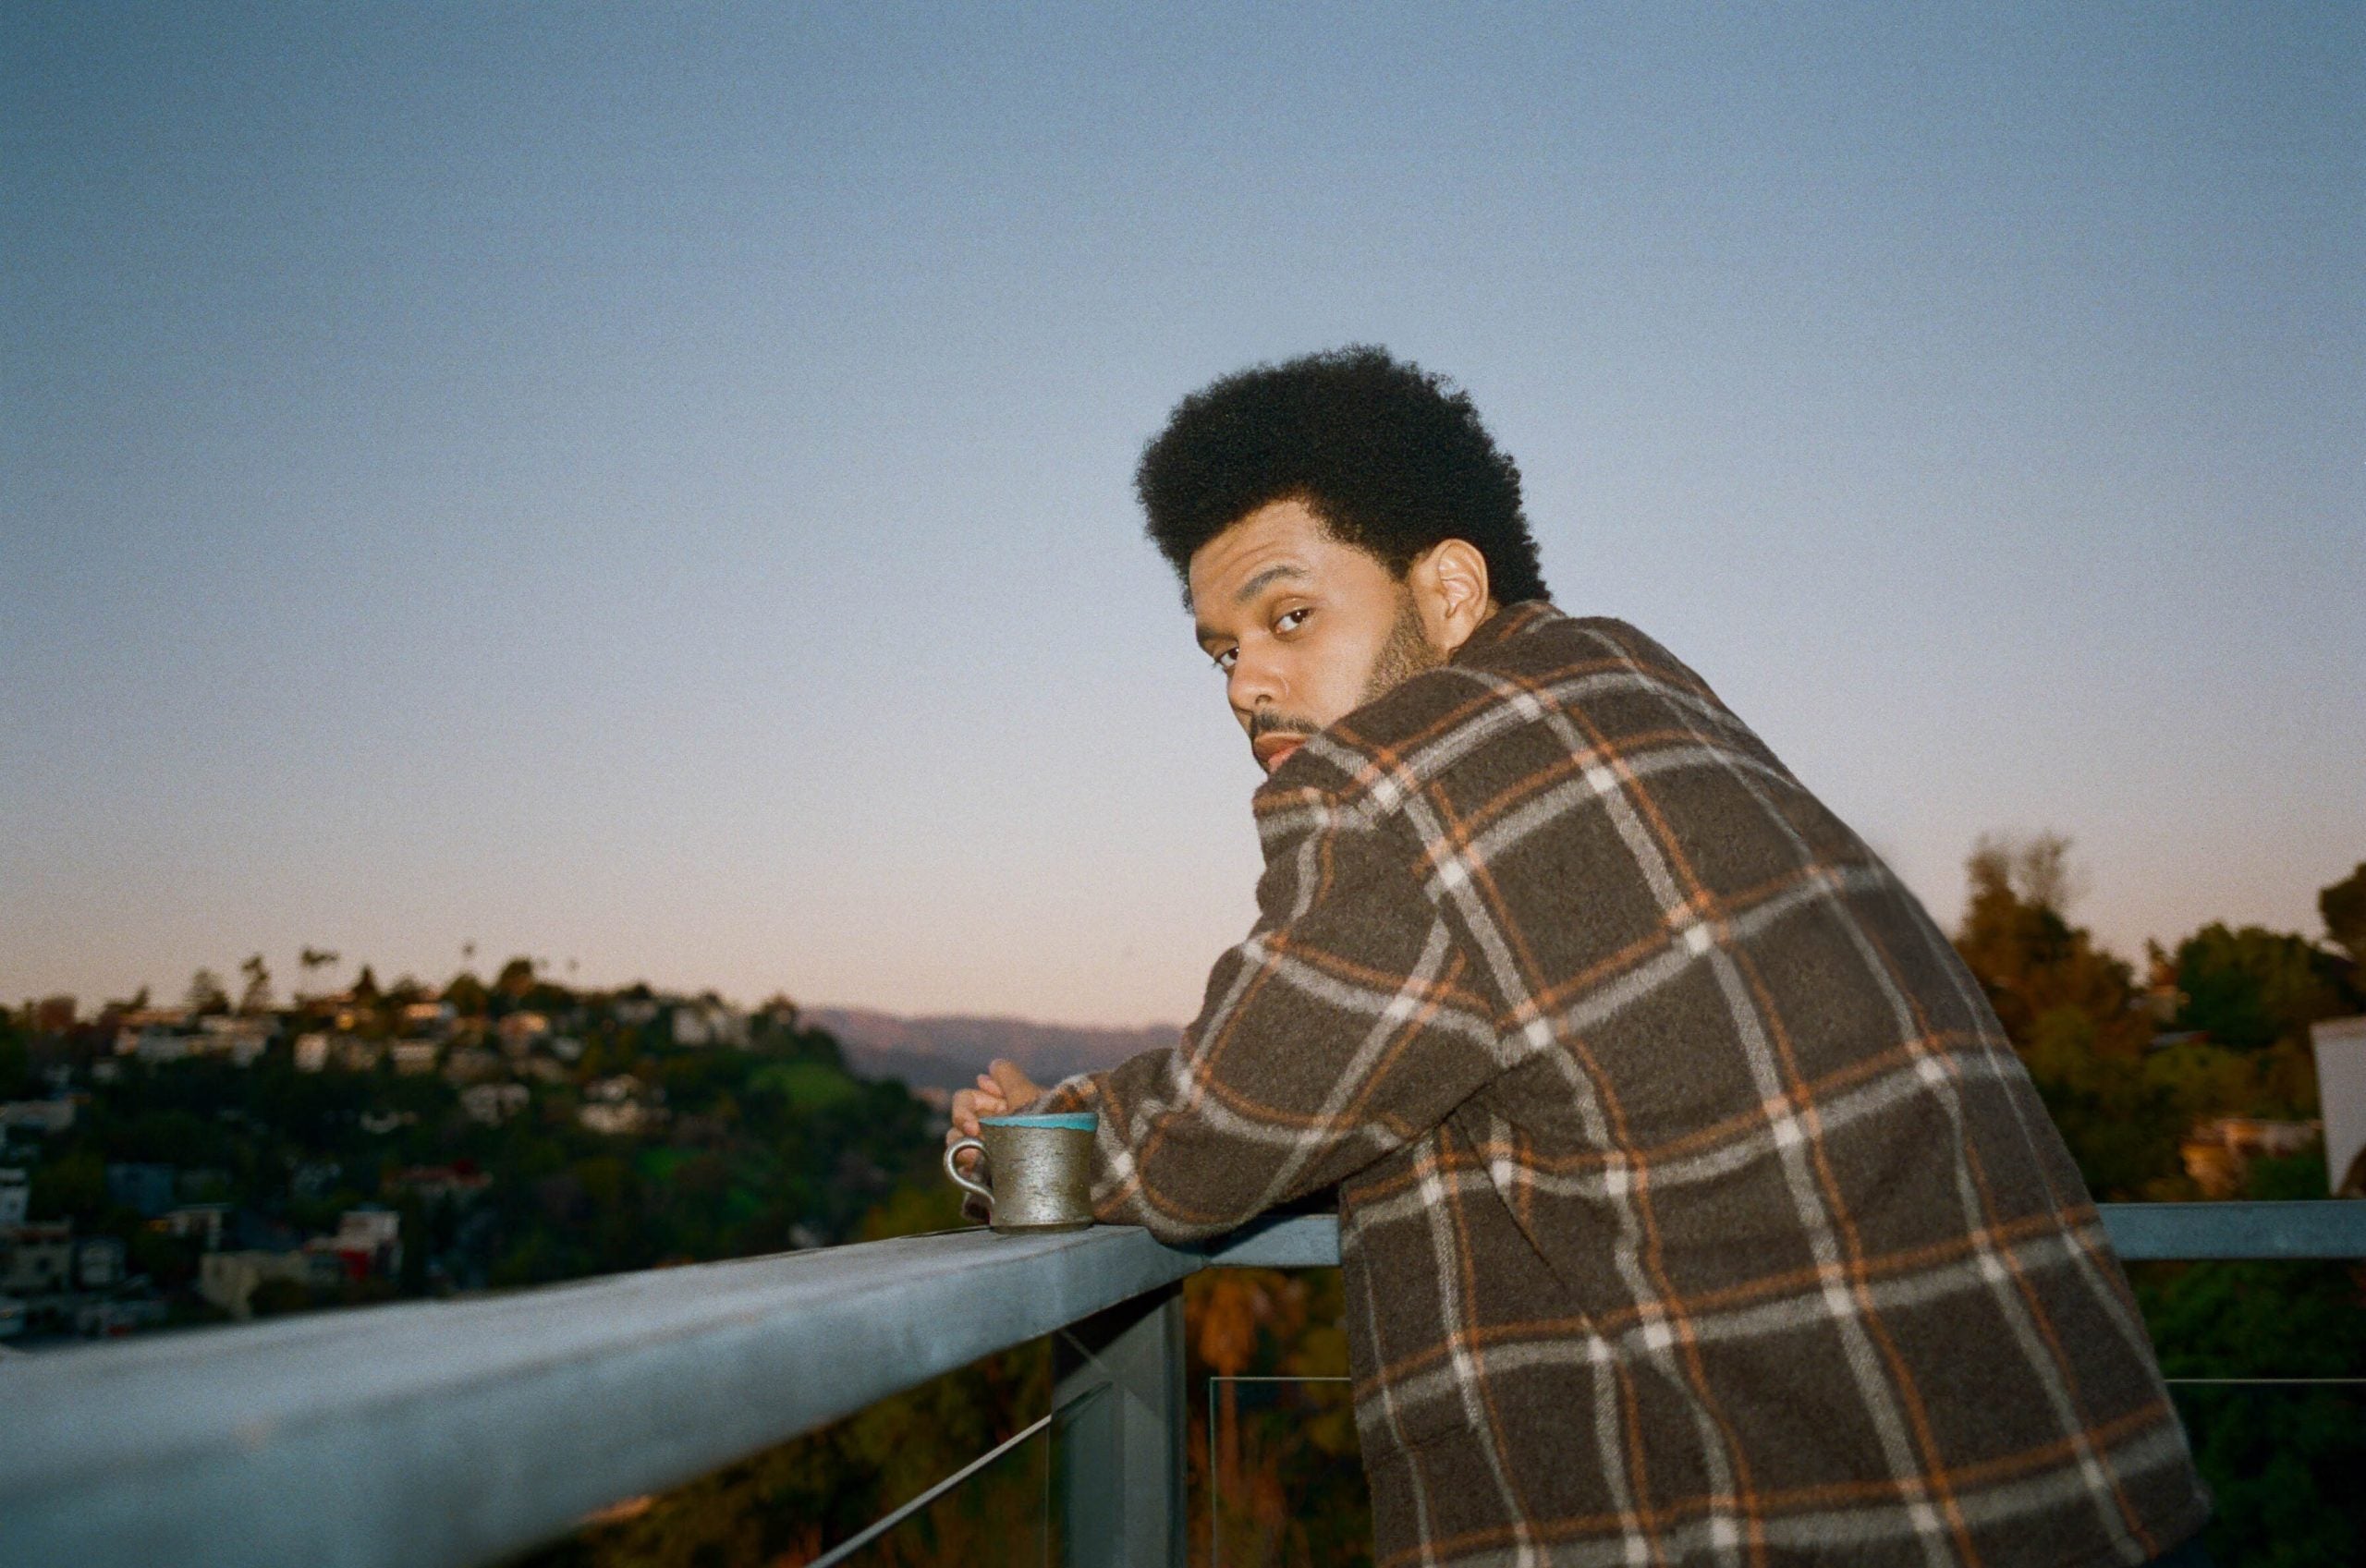 Blue Bottle Coffee And The Weeknd Team Up For New Specialty Coffee Benefitting Ethiopia